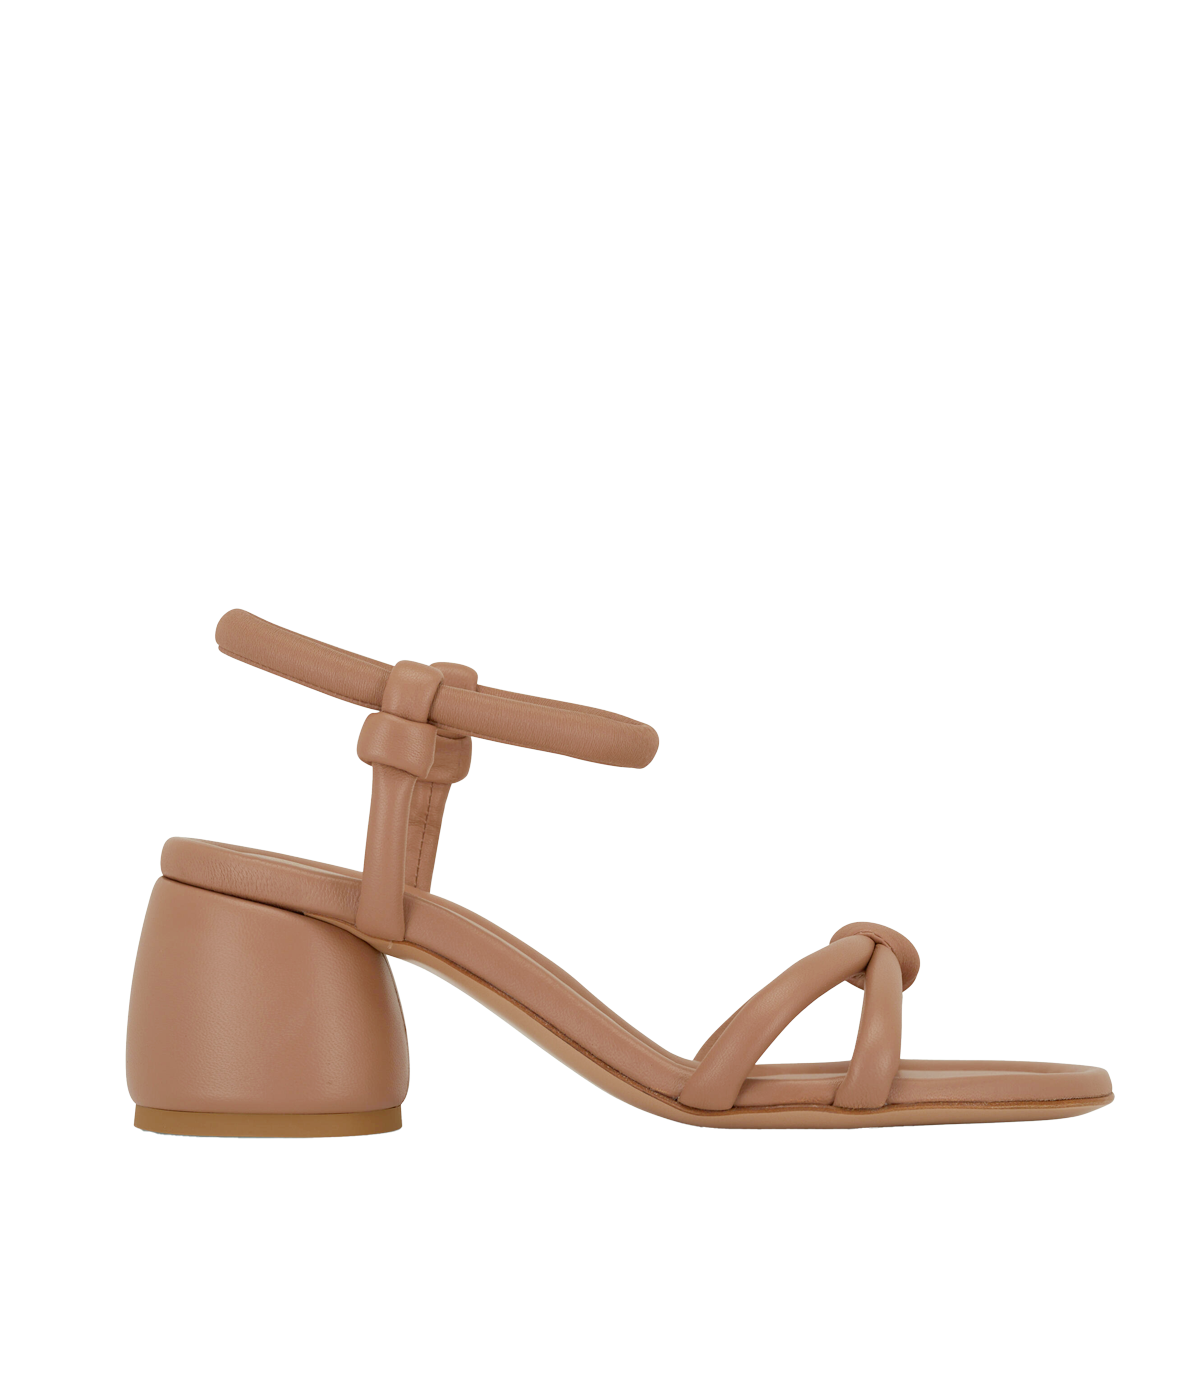 Neutral knotted leather sandal set on a chunky 65mm heel. Enjoy comfort and everyday wear in this bestselling Gianvito Rossi style.